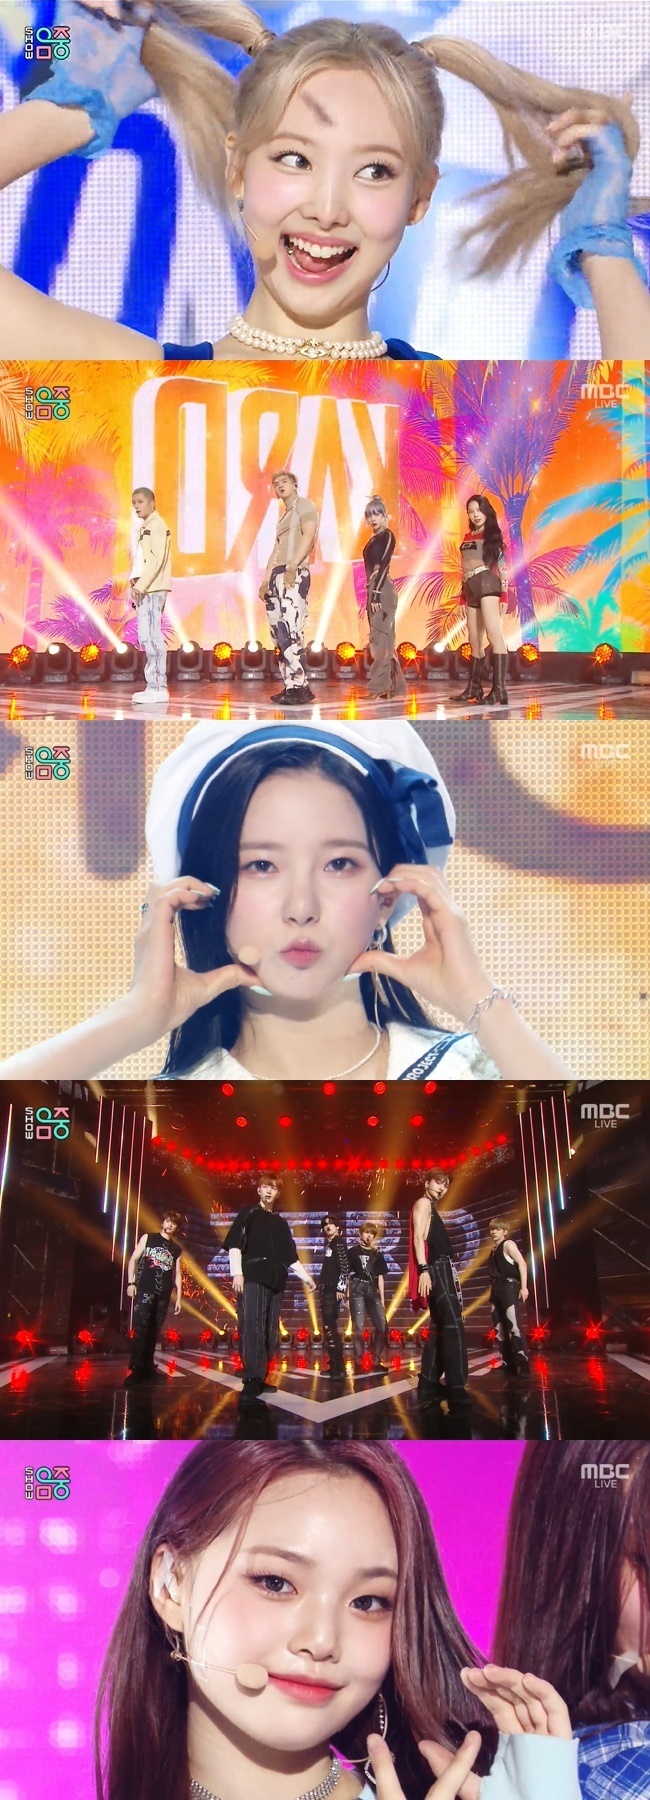 Lim Young-woong was ranked # 1 in Show! Music Core without appearing on the air.In MBC Show! Music Core broadcast on July 2, Lim Young-woong was ranked # 1 over TWICE Nayeon and BTS as Can I meet again.Sunmi returned to her new song, Im Fever in 10 months.Rise is a song that solves the various feelings of love that are hot and faint, and on the other hand, when it is over, with sensual city pop.Sunmi performed a stage to prove the name Sunmi Pop, even with a blood orange hair, a large debt, and a rubber band that matches the hot sunshine.BtoB Lee Min-hyuk made a solo comeback through his second full-length album, Youre My Spring, and the title song BOOM, which contains a new excitement from the stranger.Lee Min-hyuk continued to grow in the decade of debut with a confident stage with sexy visuals.The gifted Godseven (GOT7) returned to Shinbo after eight months.The mini-second album title song SUGAR released by the gifted on the day is a song that likens addictive love that can not be stopped to sugar, giving a romantic sensibility of midsummer.Dawn (DAWN) released the new song Stupid Cool, which was released on the 16th.Stupid Cool is a song that tells you that you are in love with yourself as stupid but cool, and Dunn has set up a stage with unique sensibility.The show included Sunmi, BtoB Lee Min-hyuk, Gifted, TWICE Nayeon, Dunn (DAWN), Card (KARD), Kepler (Kep1er), Drifin (DRIPPIN), OmegaX (OMEGA X), Pixie (PIXY), Tan (TAN), Clas (CLASS:y), Aichelin (ICHILLIN Lapilus, XG, and others.